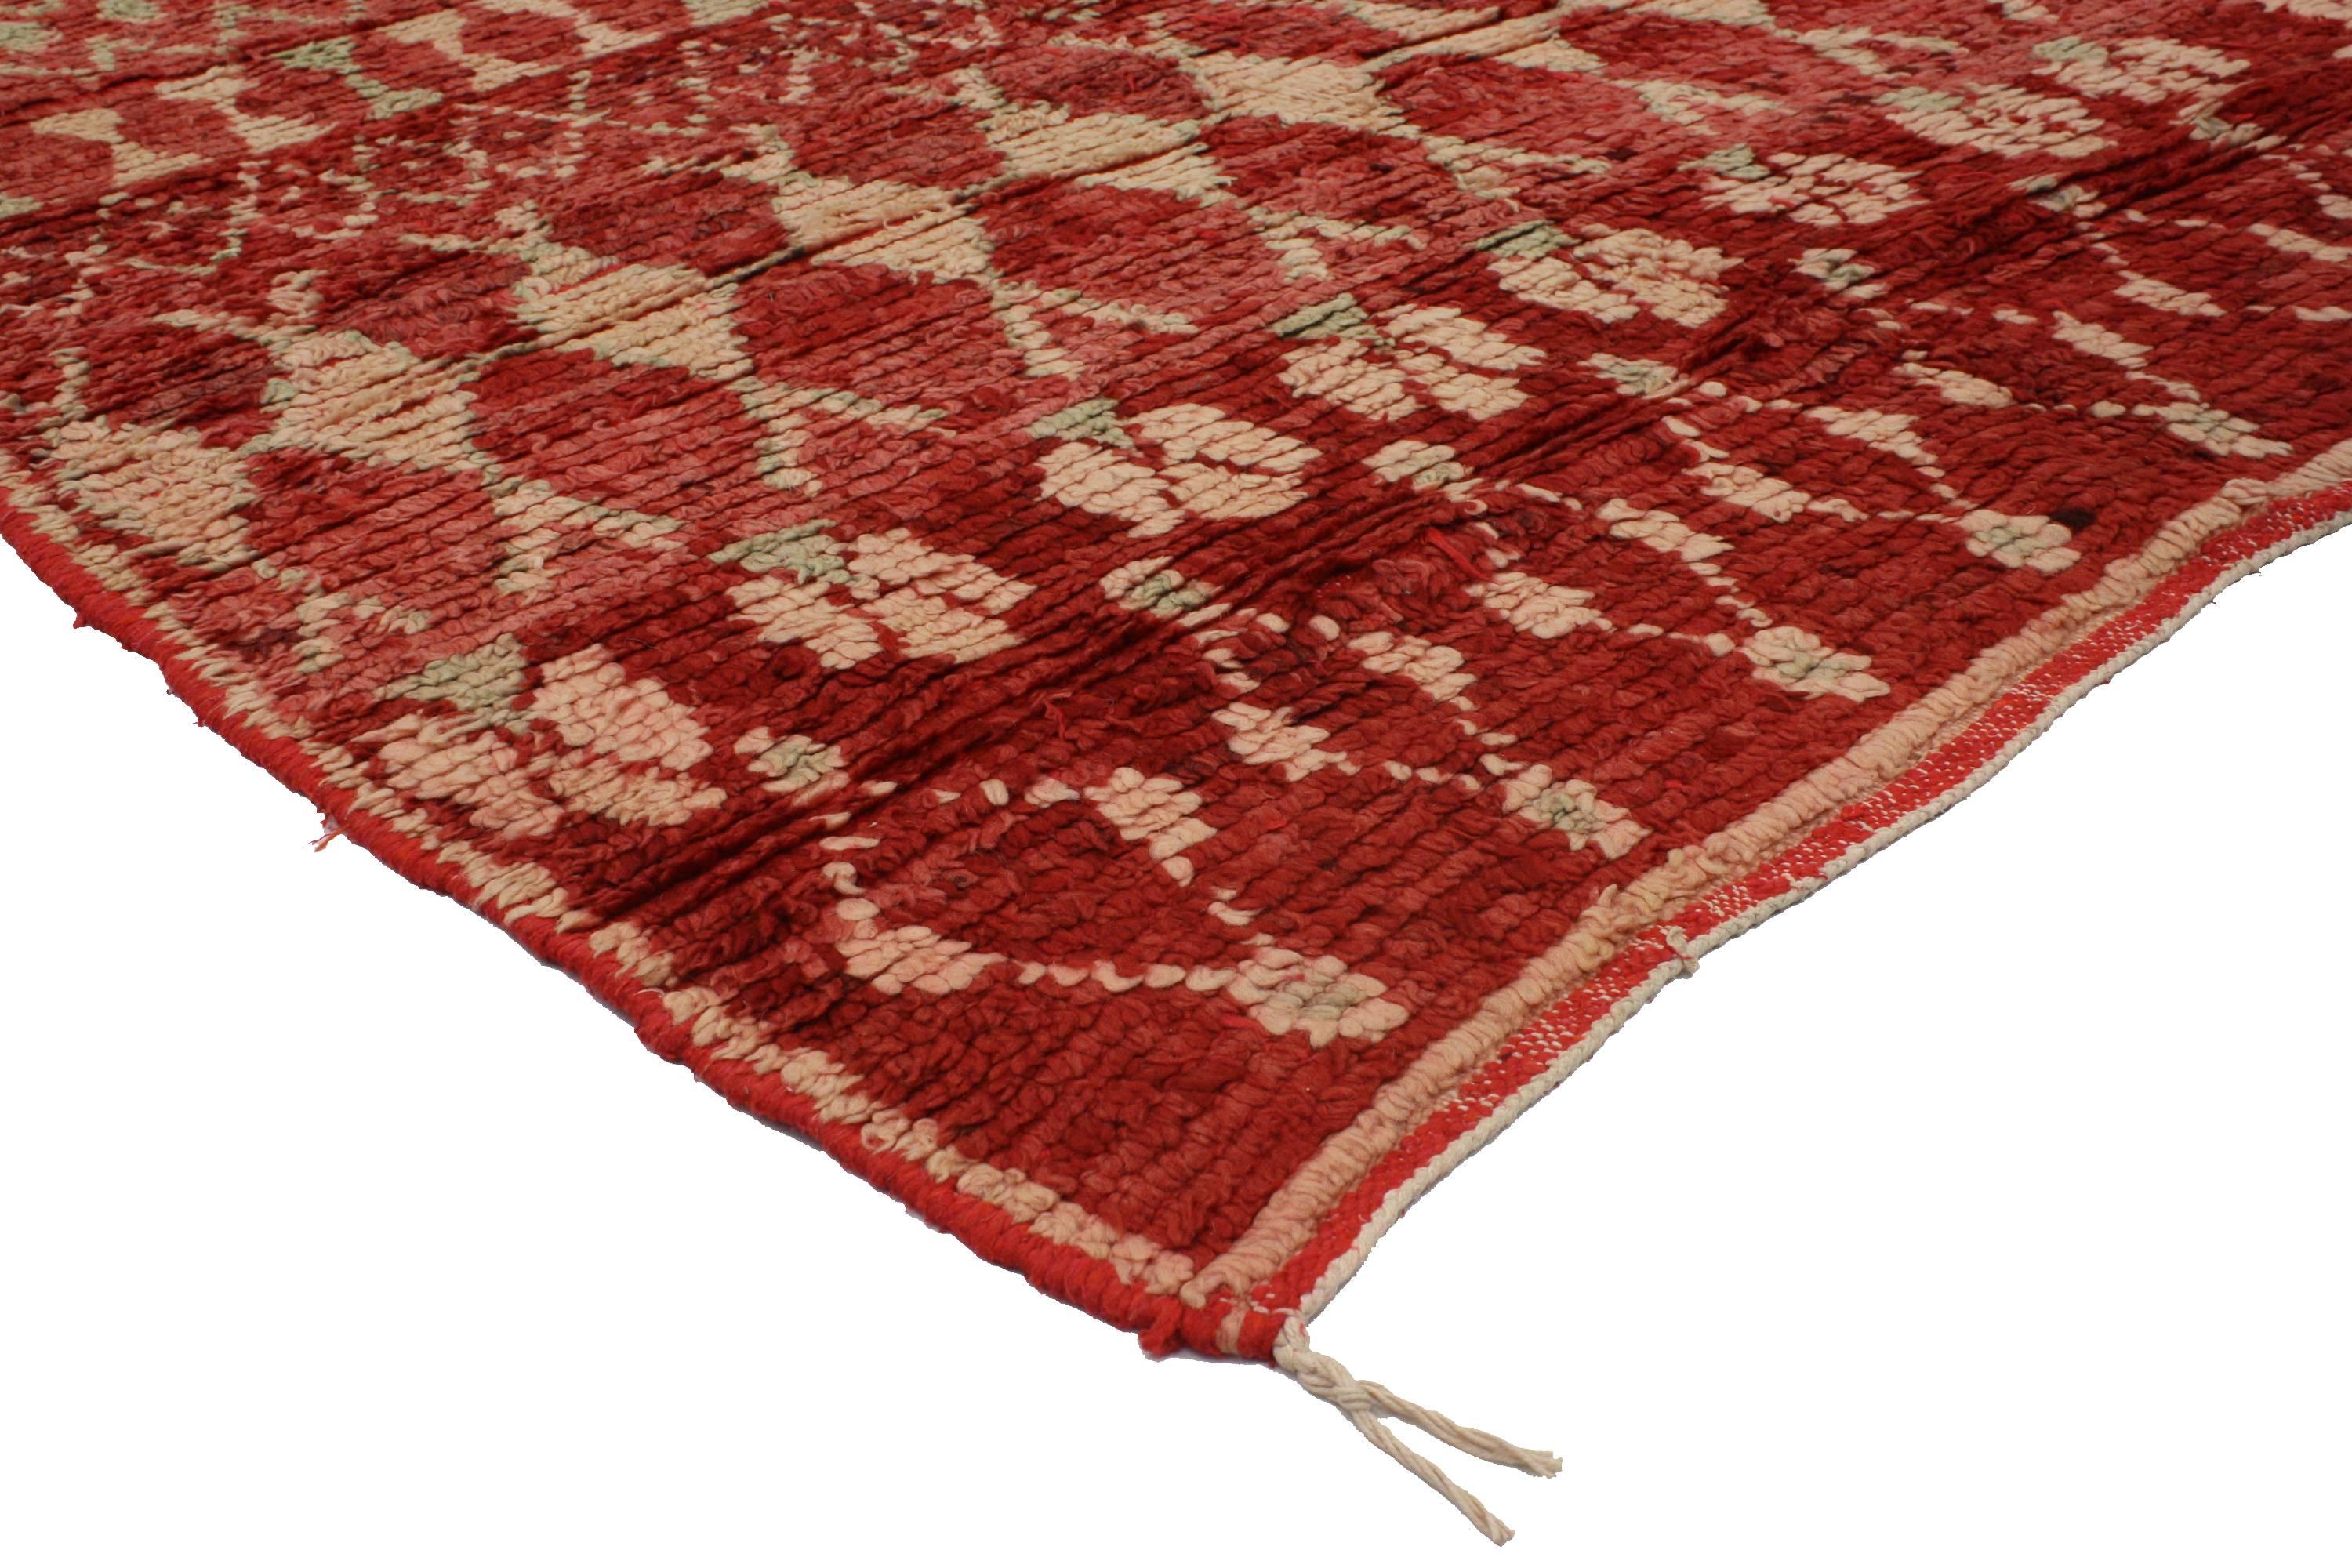 Hand-Knotted Mid-Century Modern Style Berber Moroccan Red Rug with Diamonds